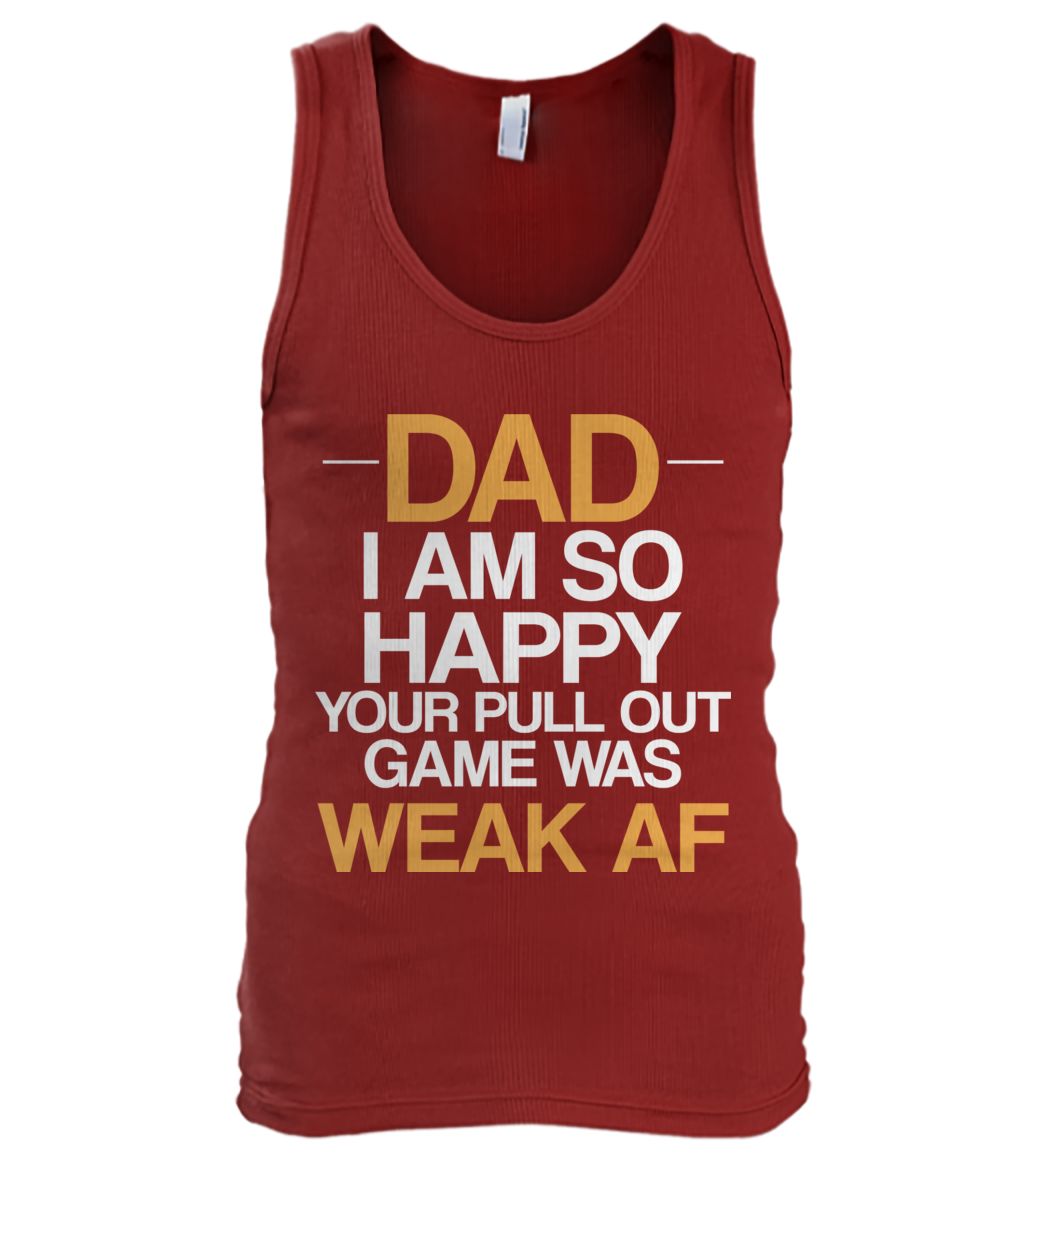 Dad I'm so happy your pull out game was weak af men's tank top